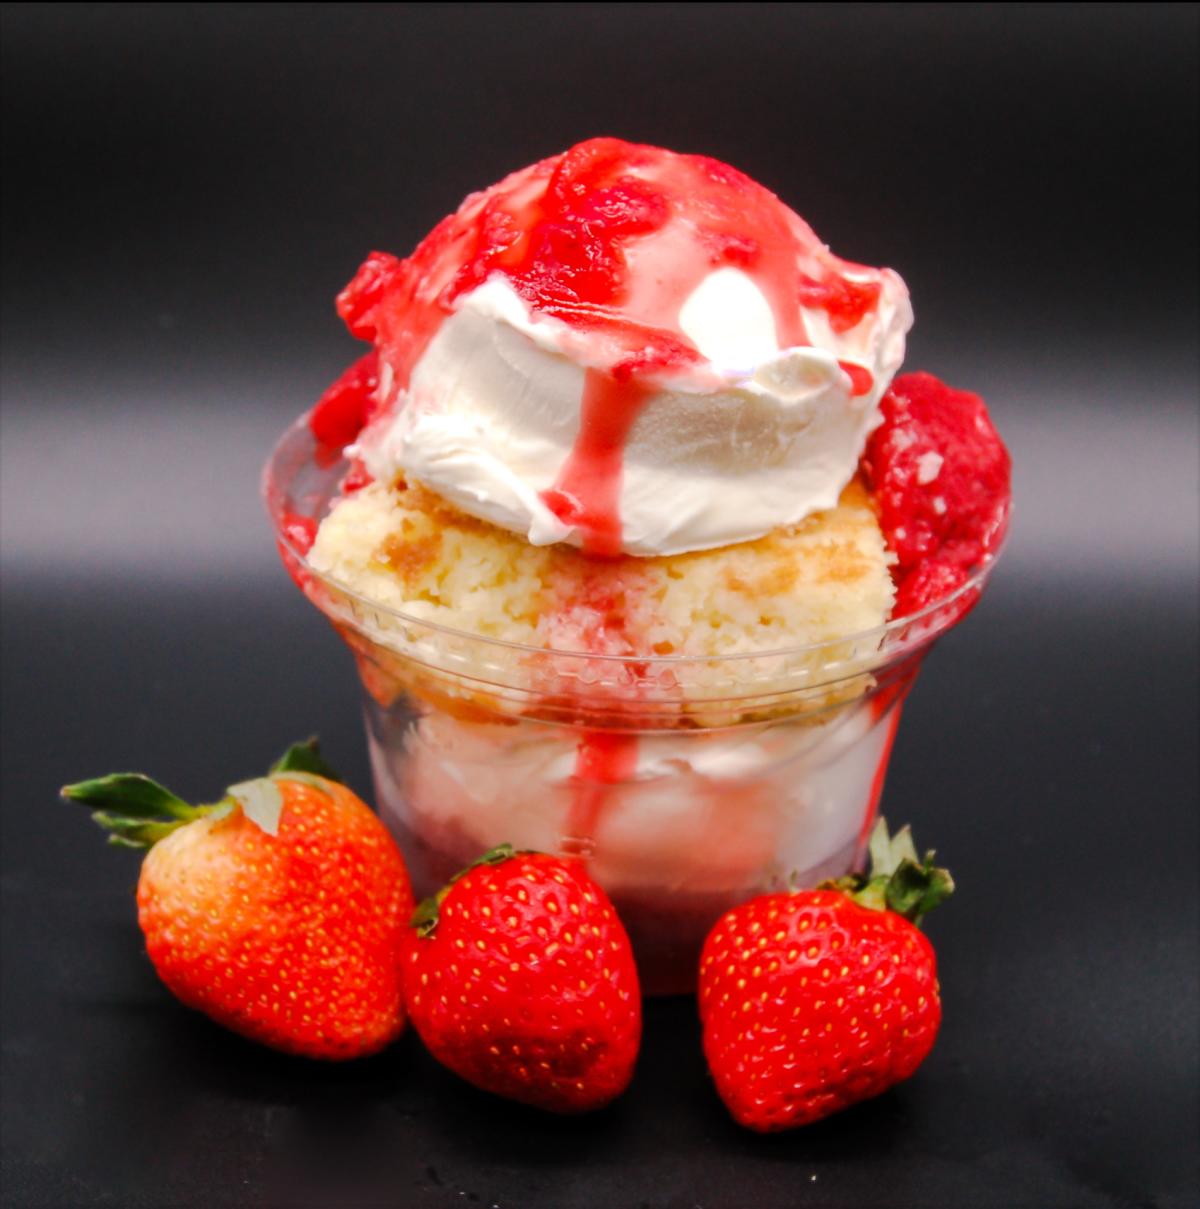 strawberry shortcake ice cream cup from Campbells Frozen custard with 3 fresh strawberries